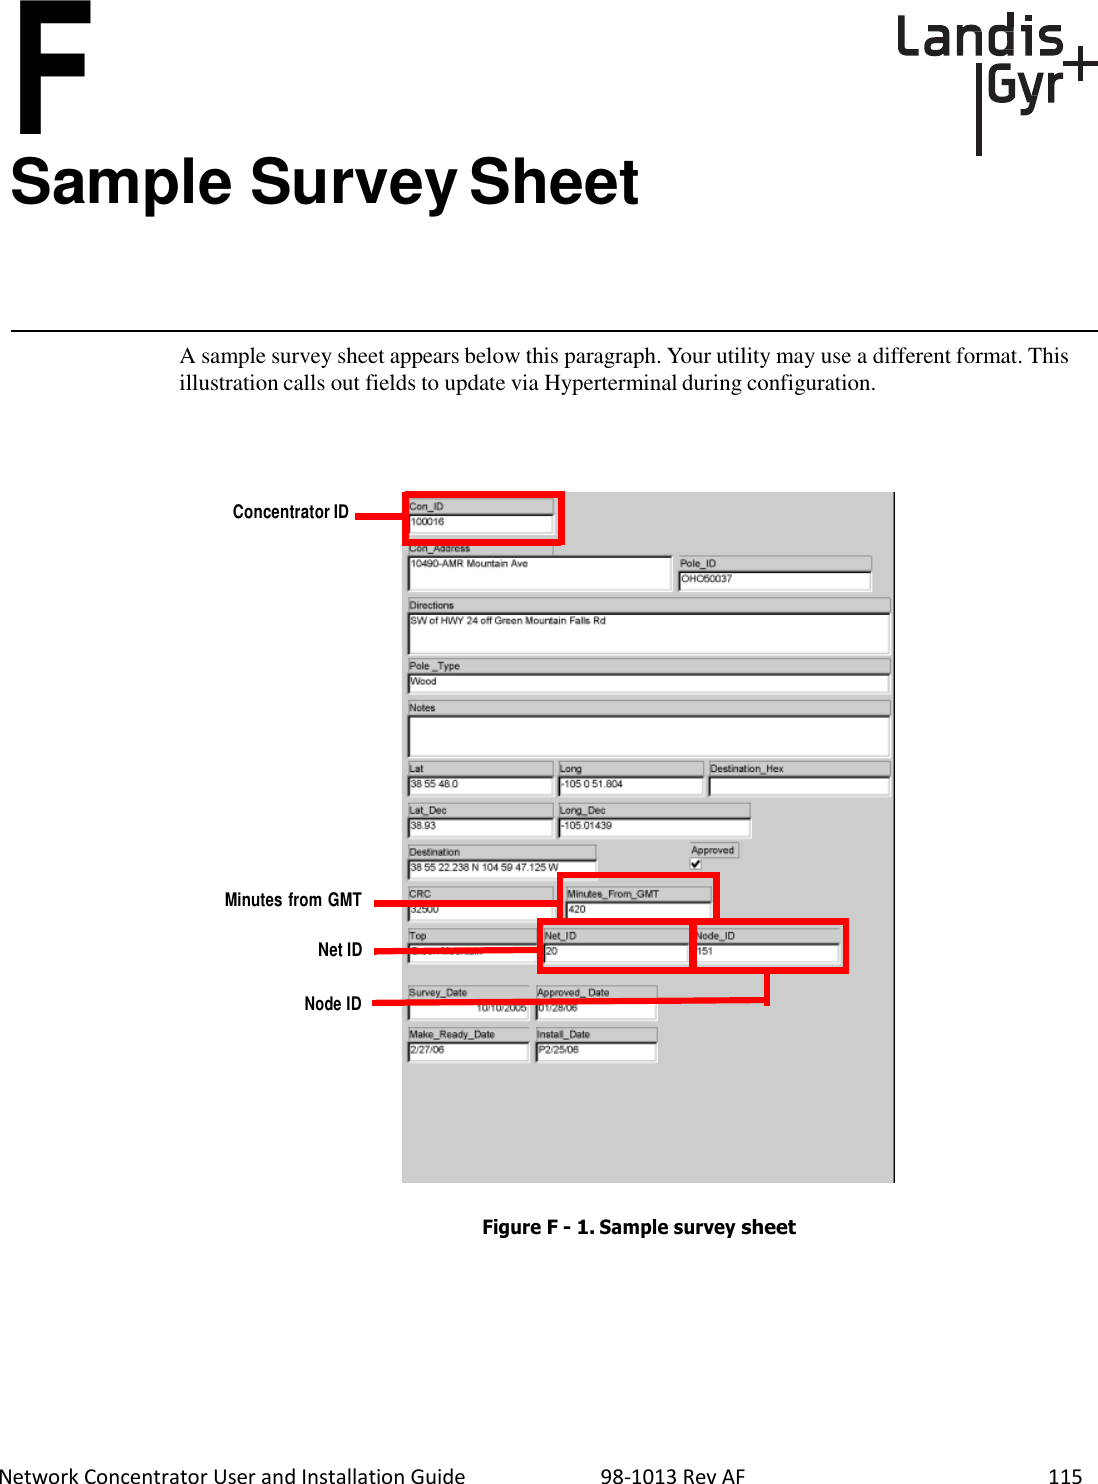 F Sample Survey Sheet  Network Concentrator User and Installation Guide                          98-1013 Rev AF    115     A sample survey sheet appears below this paragraph. Your utility may use a different format. This illustration calls out fields to update via Hyperterminal during configuration.      Concentrator ID                  Minutes from GMT  Net ID   Node ID           Figure F - 1. Sample survey sheet 